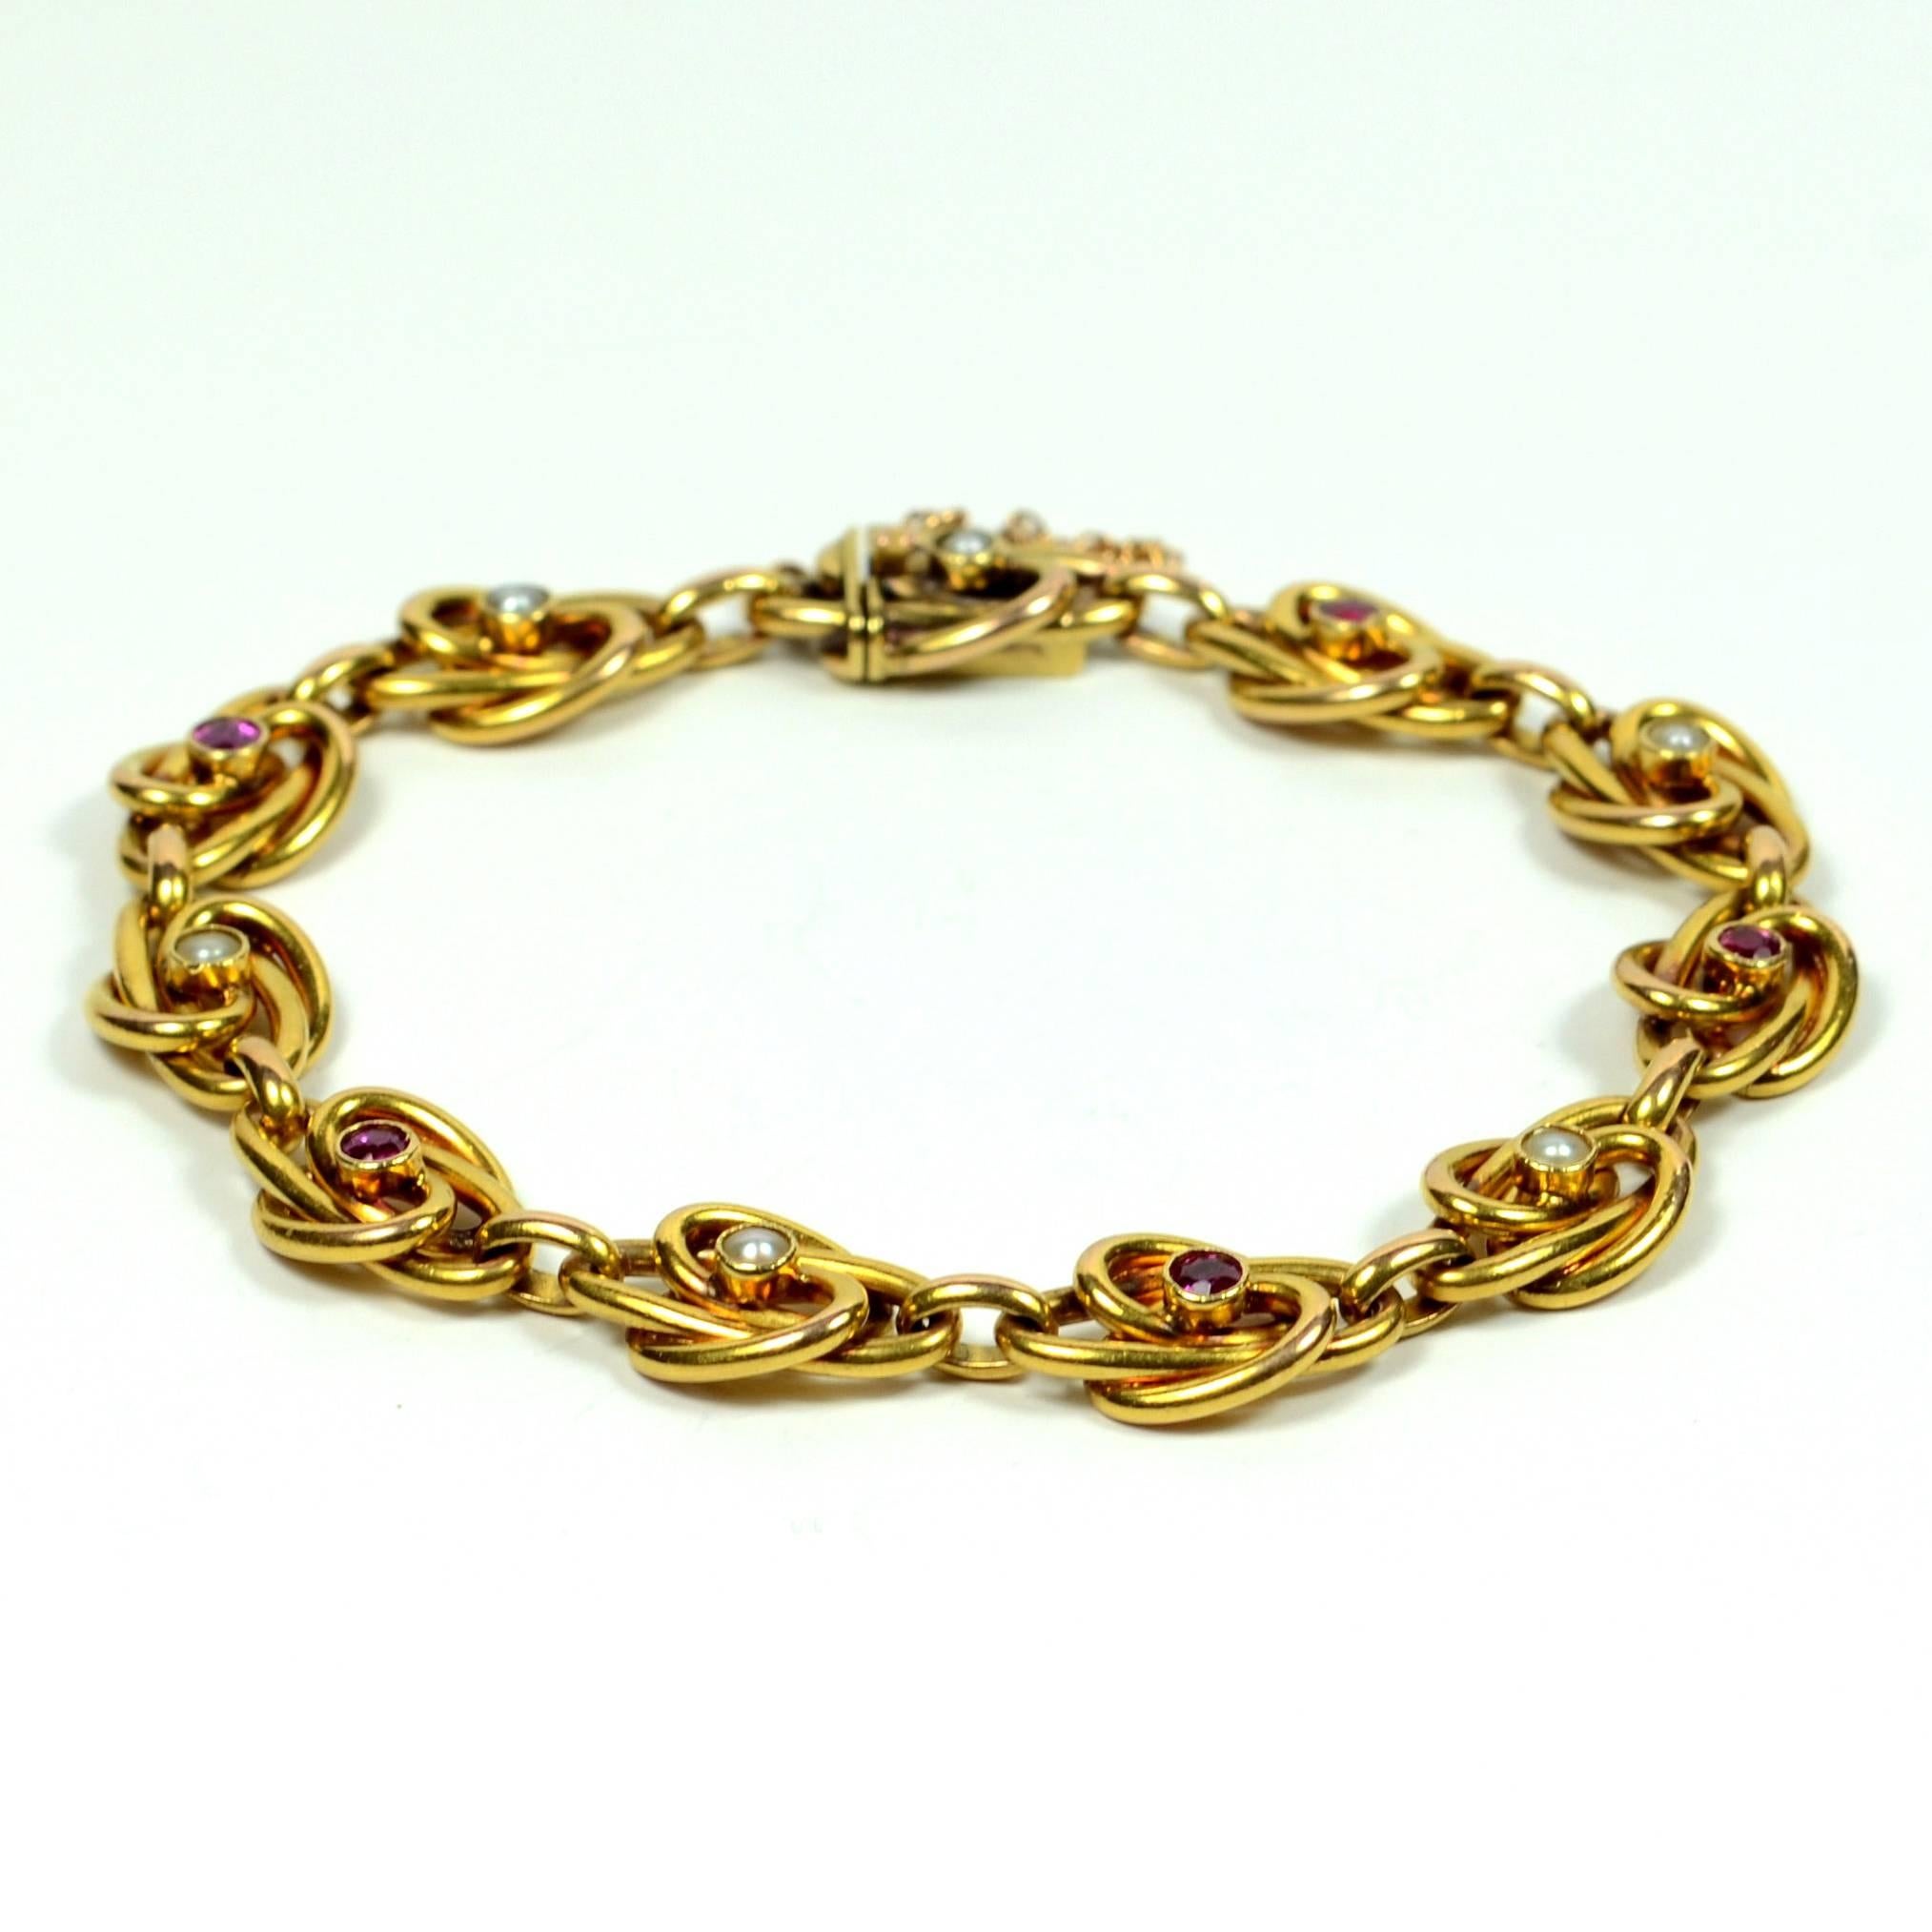 A lovely heavy 18 carat yellow gold link bracelet with scrolling links set alternately with natural pearls and rubies. The links have soft and flowing lines of gold that intertwine around each collet-set gemstone. 

The natural rubies are bright